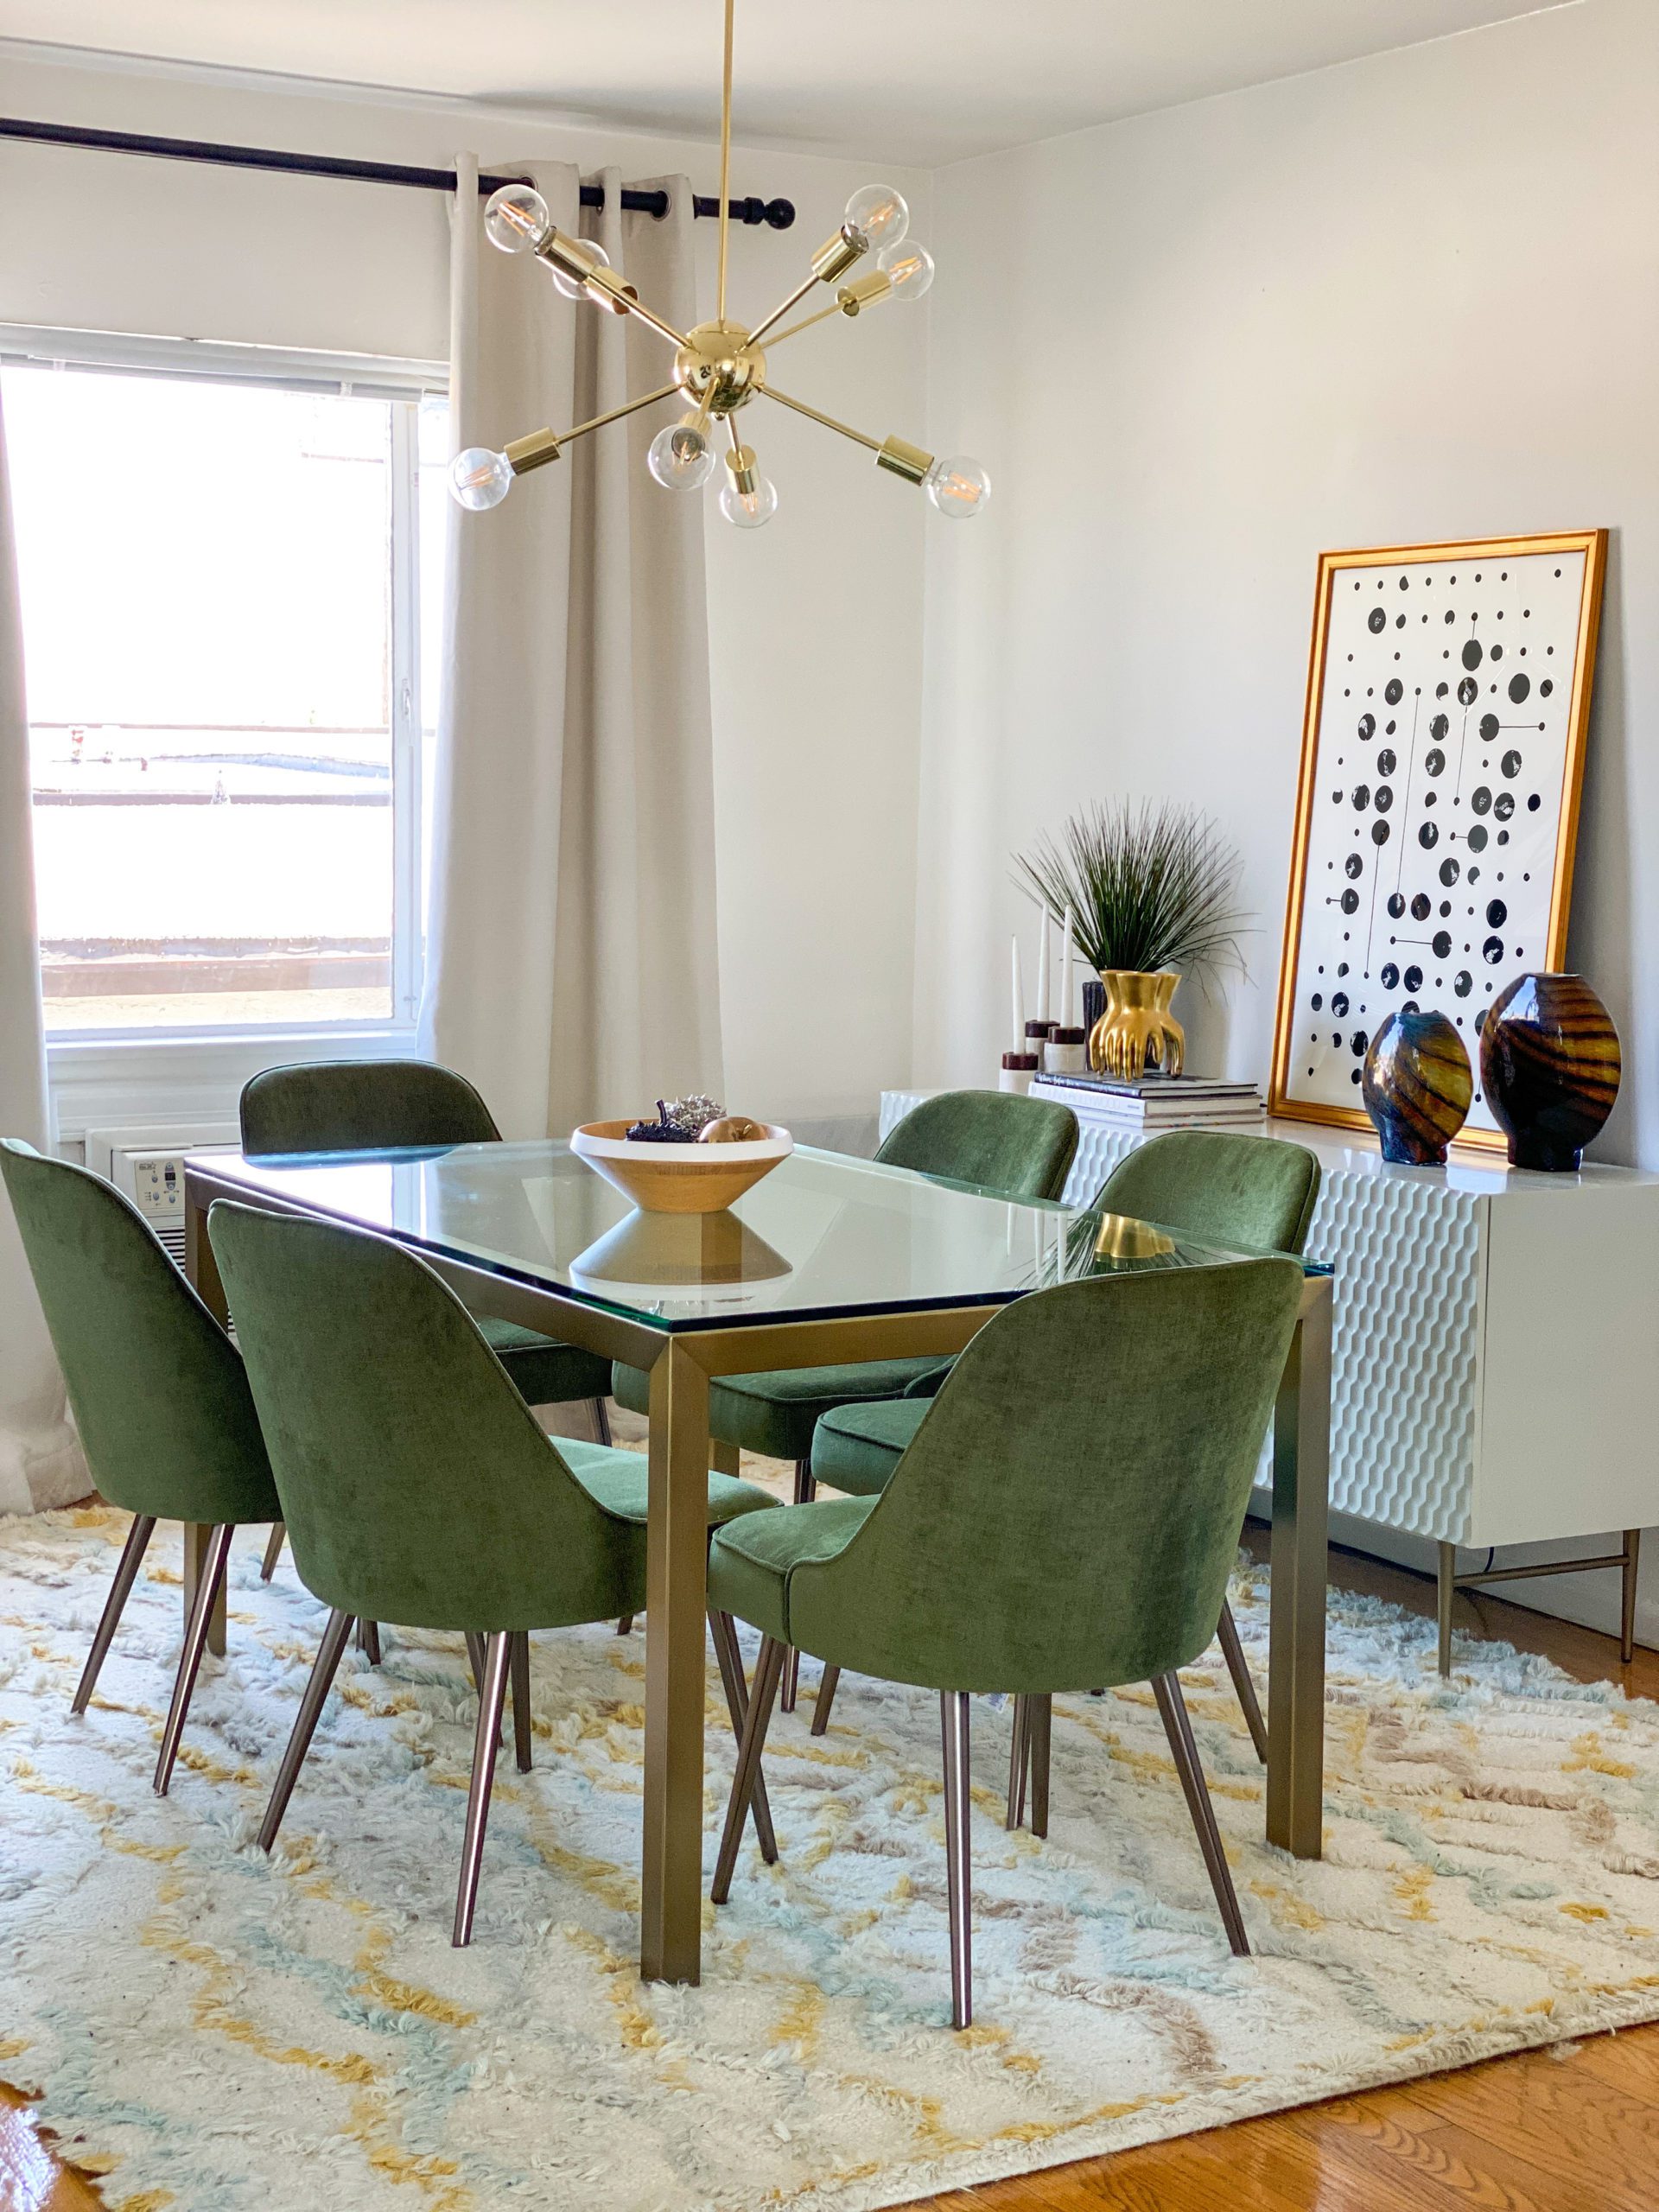 Furniture For A Mid century Modern Dining Area